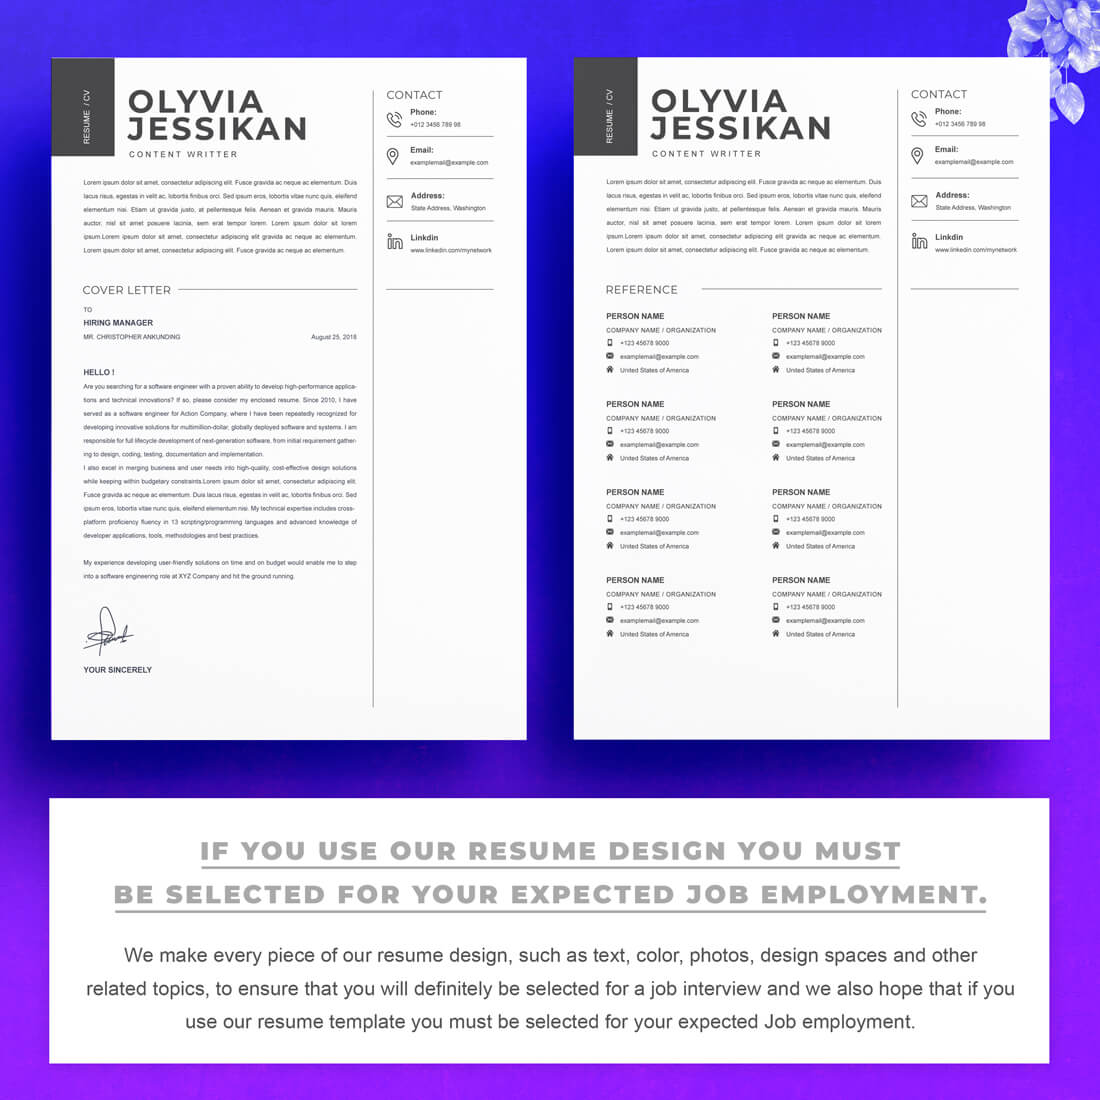 03 2 pages free resume design template copy copy 1 863